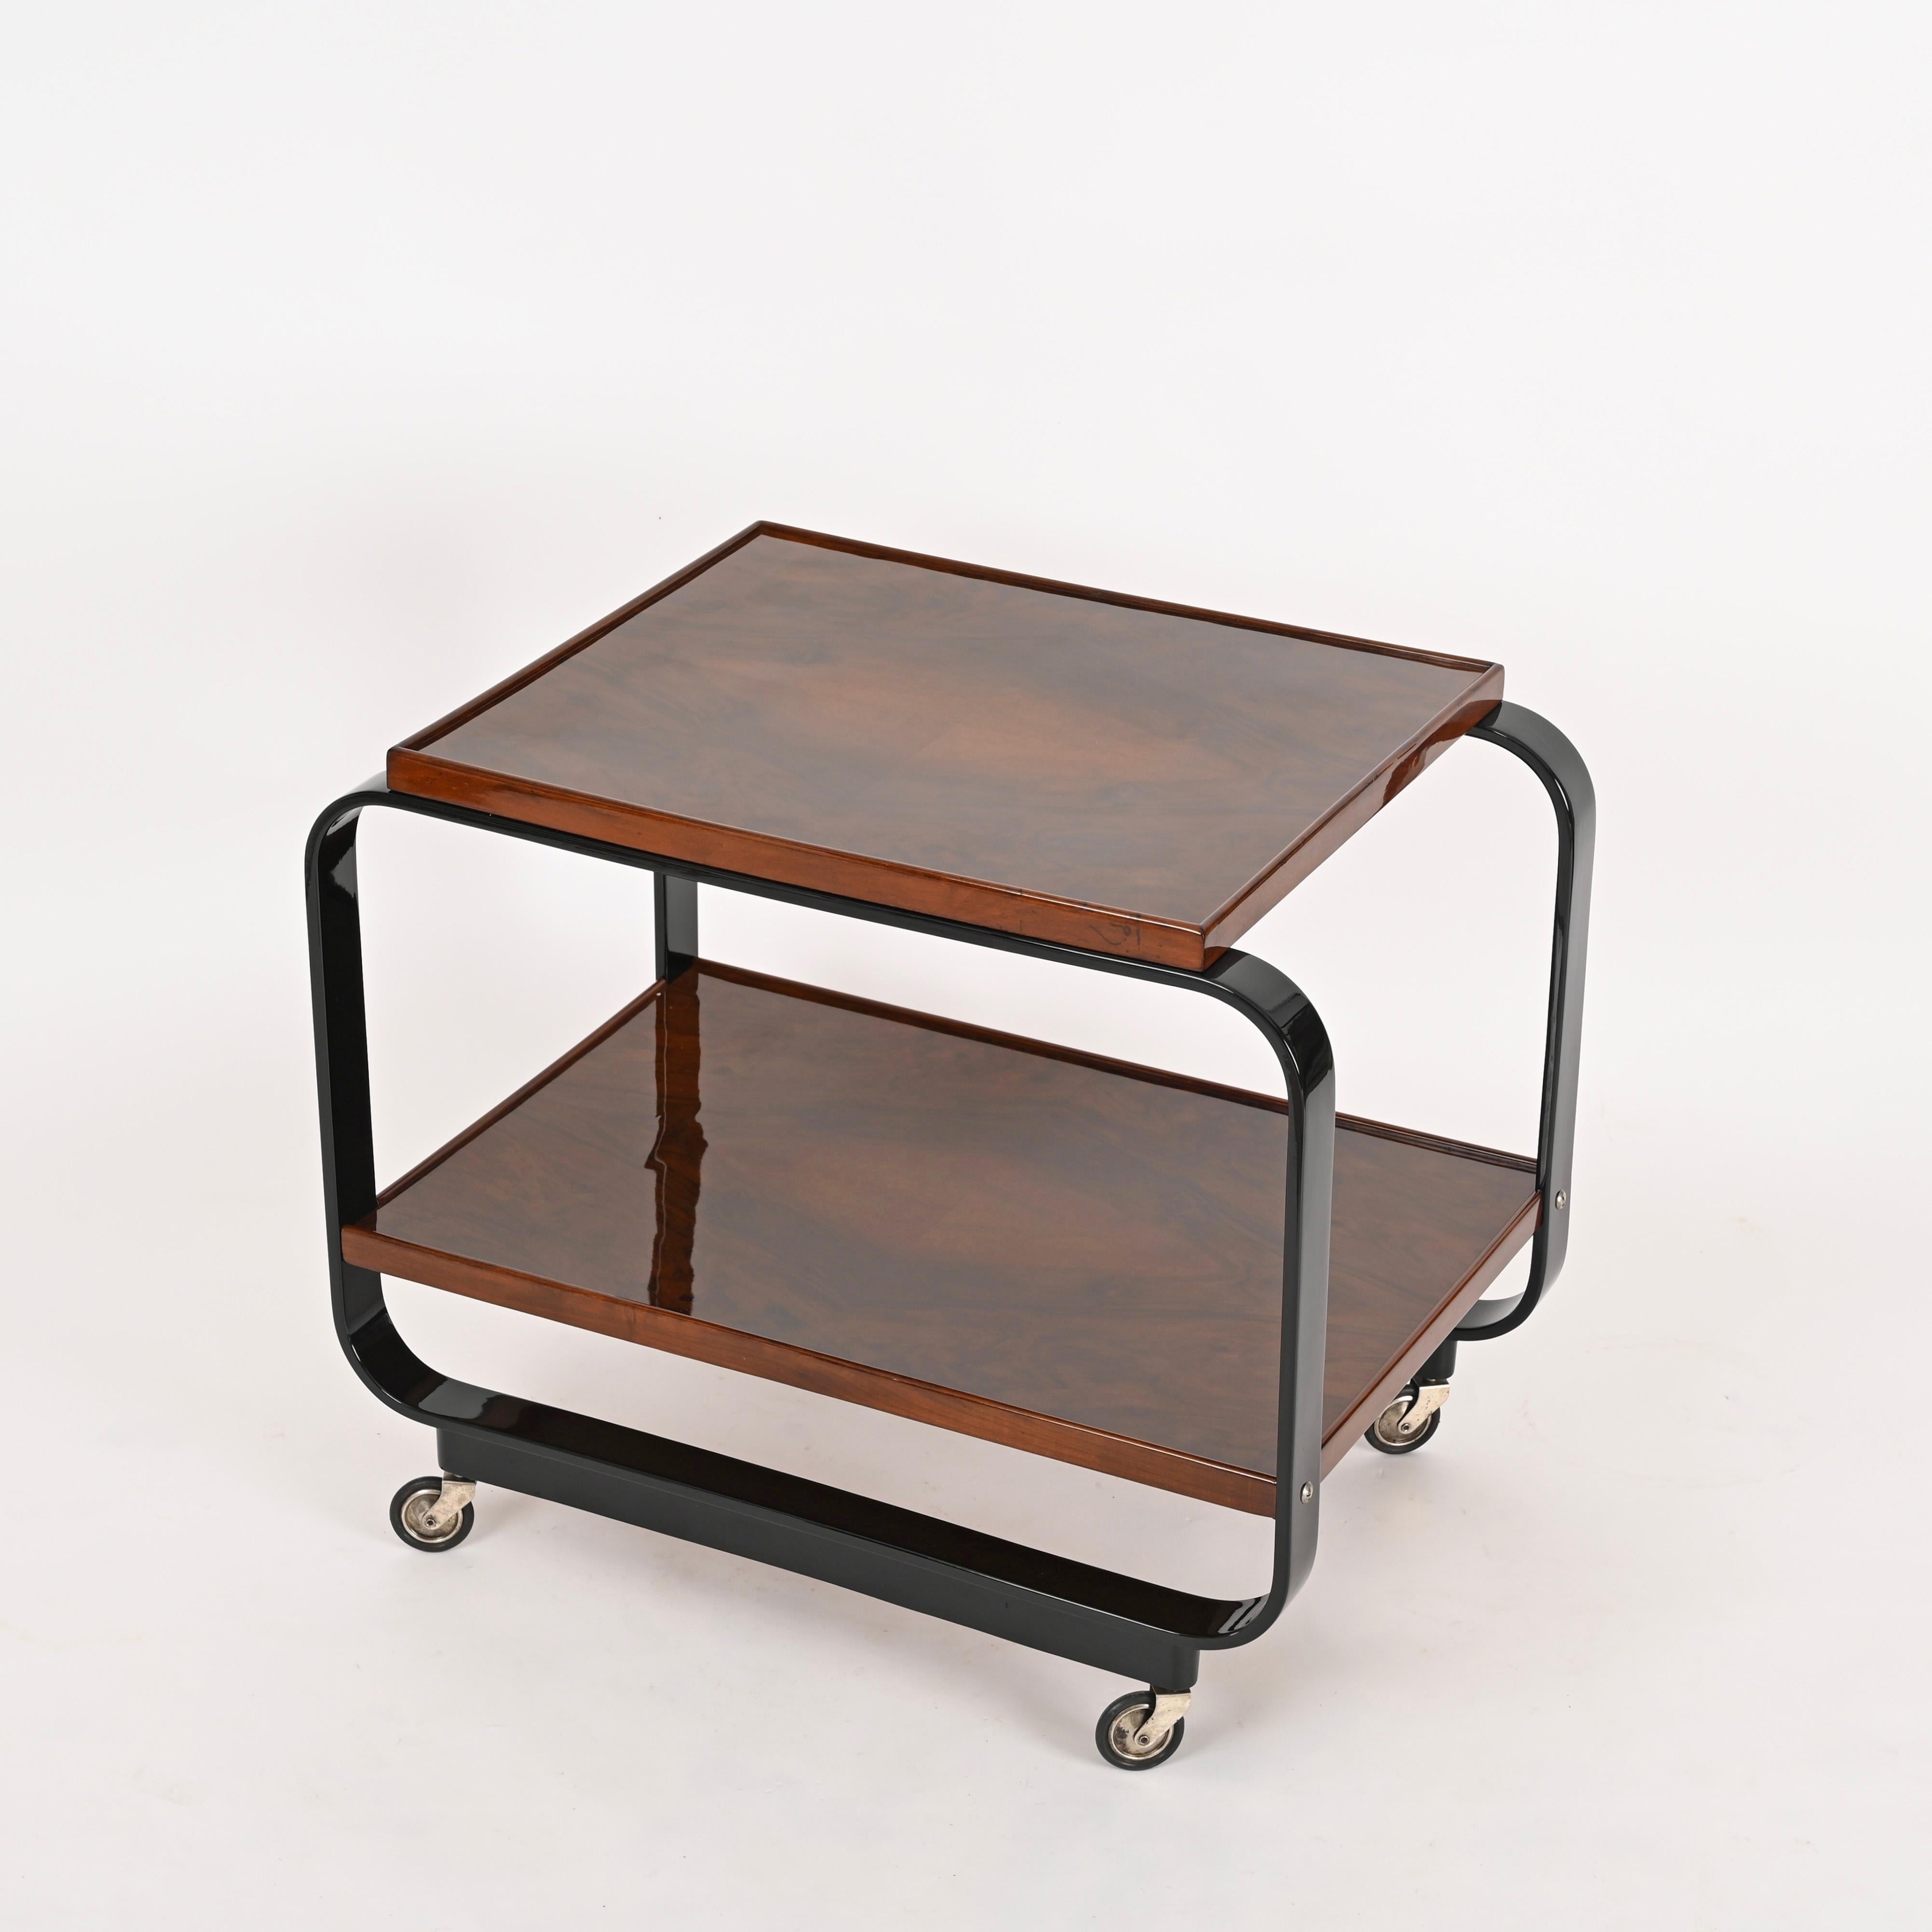 Serving Bar Cart by Gino Maggioni Signed, Bent Curly Walnut Wood, Italy, 1930s For Sale 3